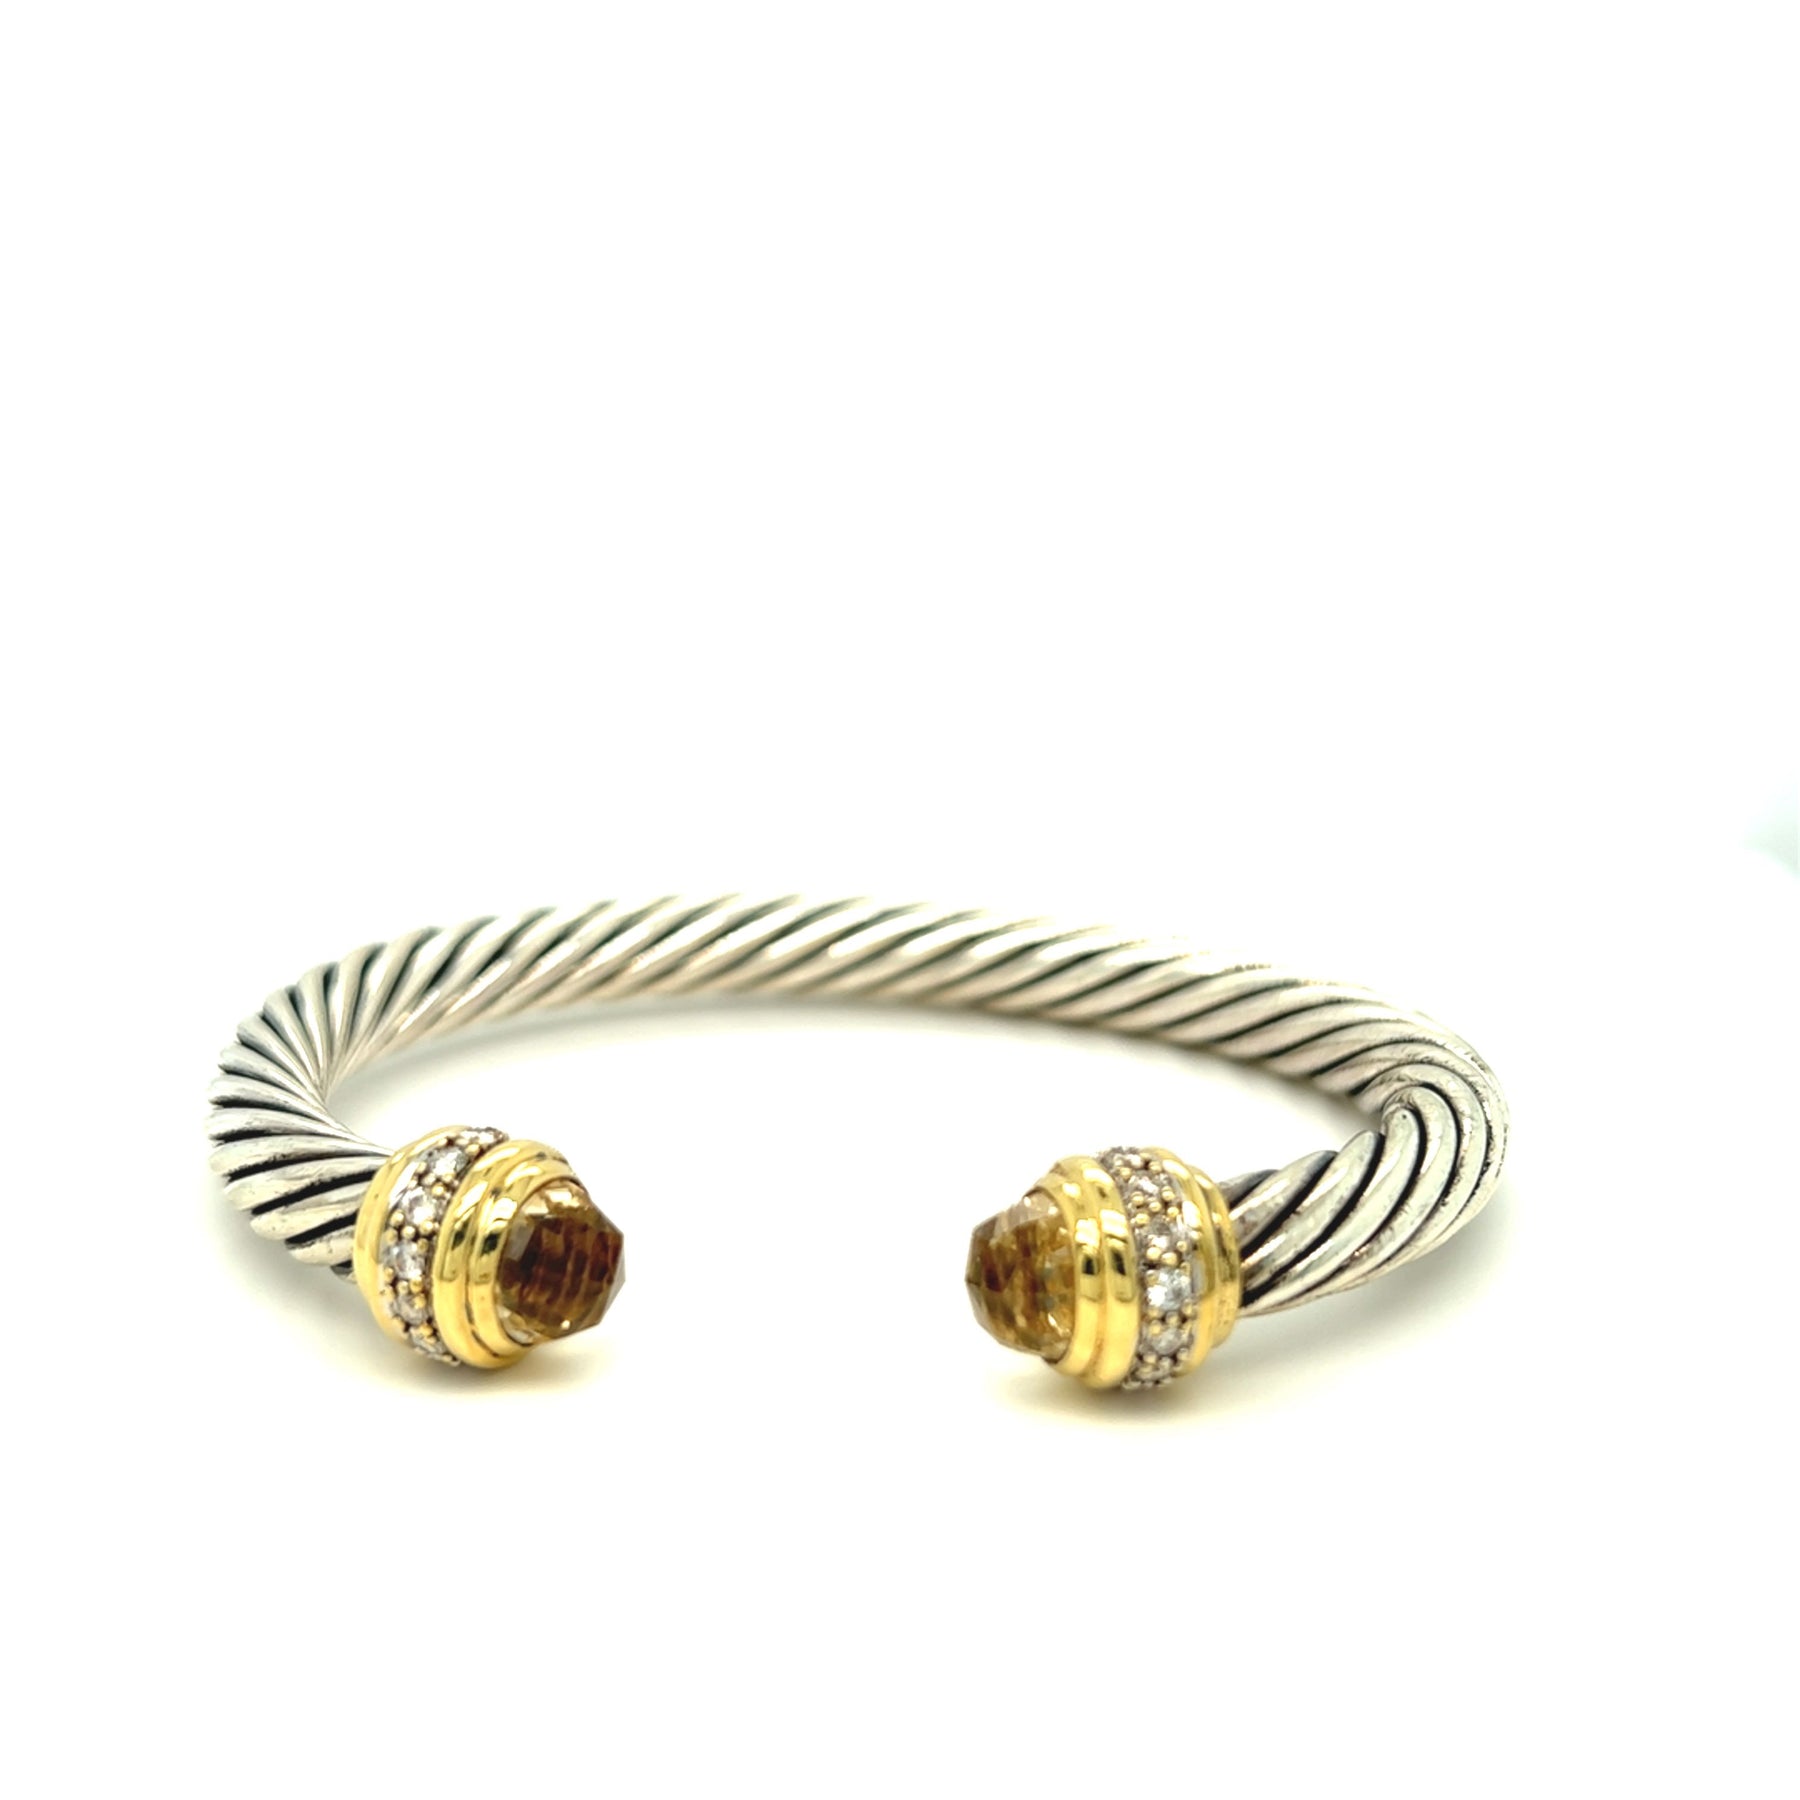 Silver Yurman Gems Diamond Are Bangle Forever Bracelet Cuff and Cable and Citrine David –